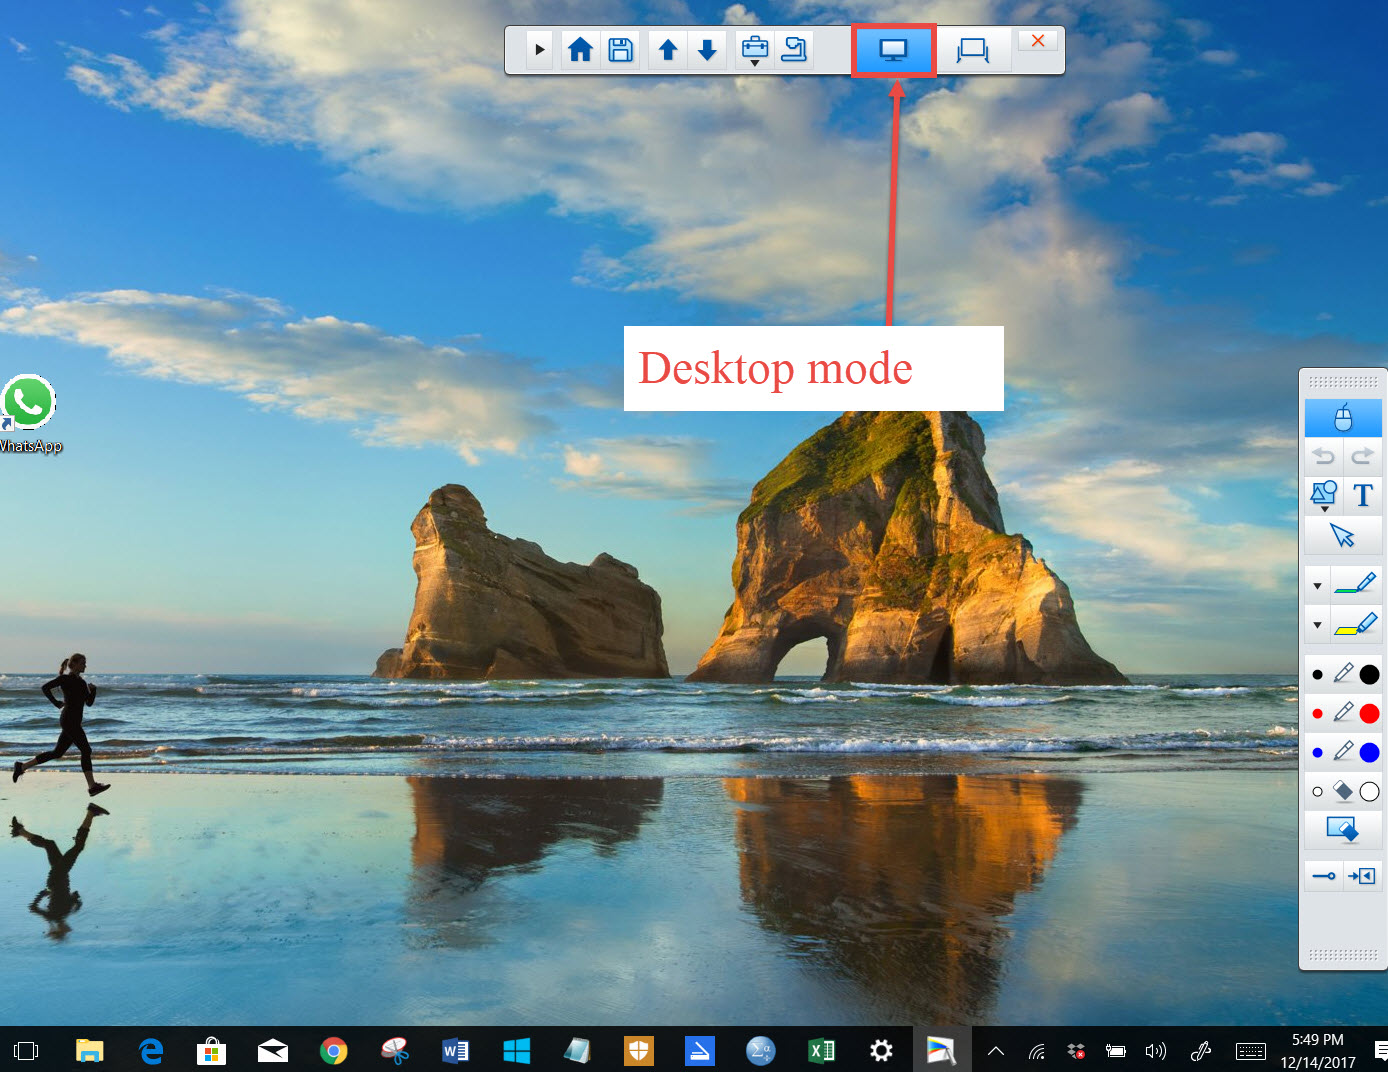 Desktop mode let you use the function of the computer